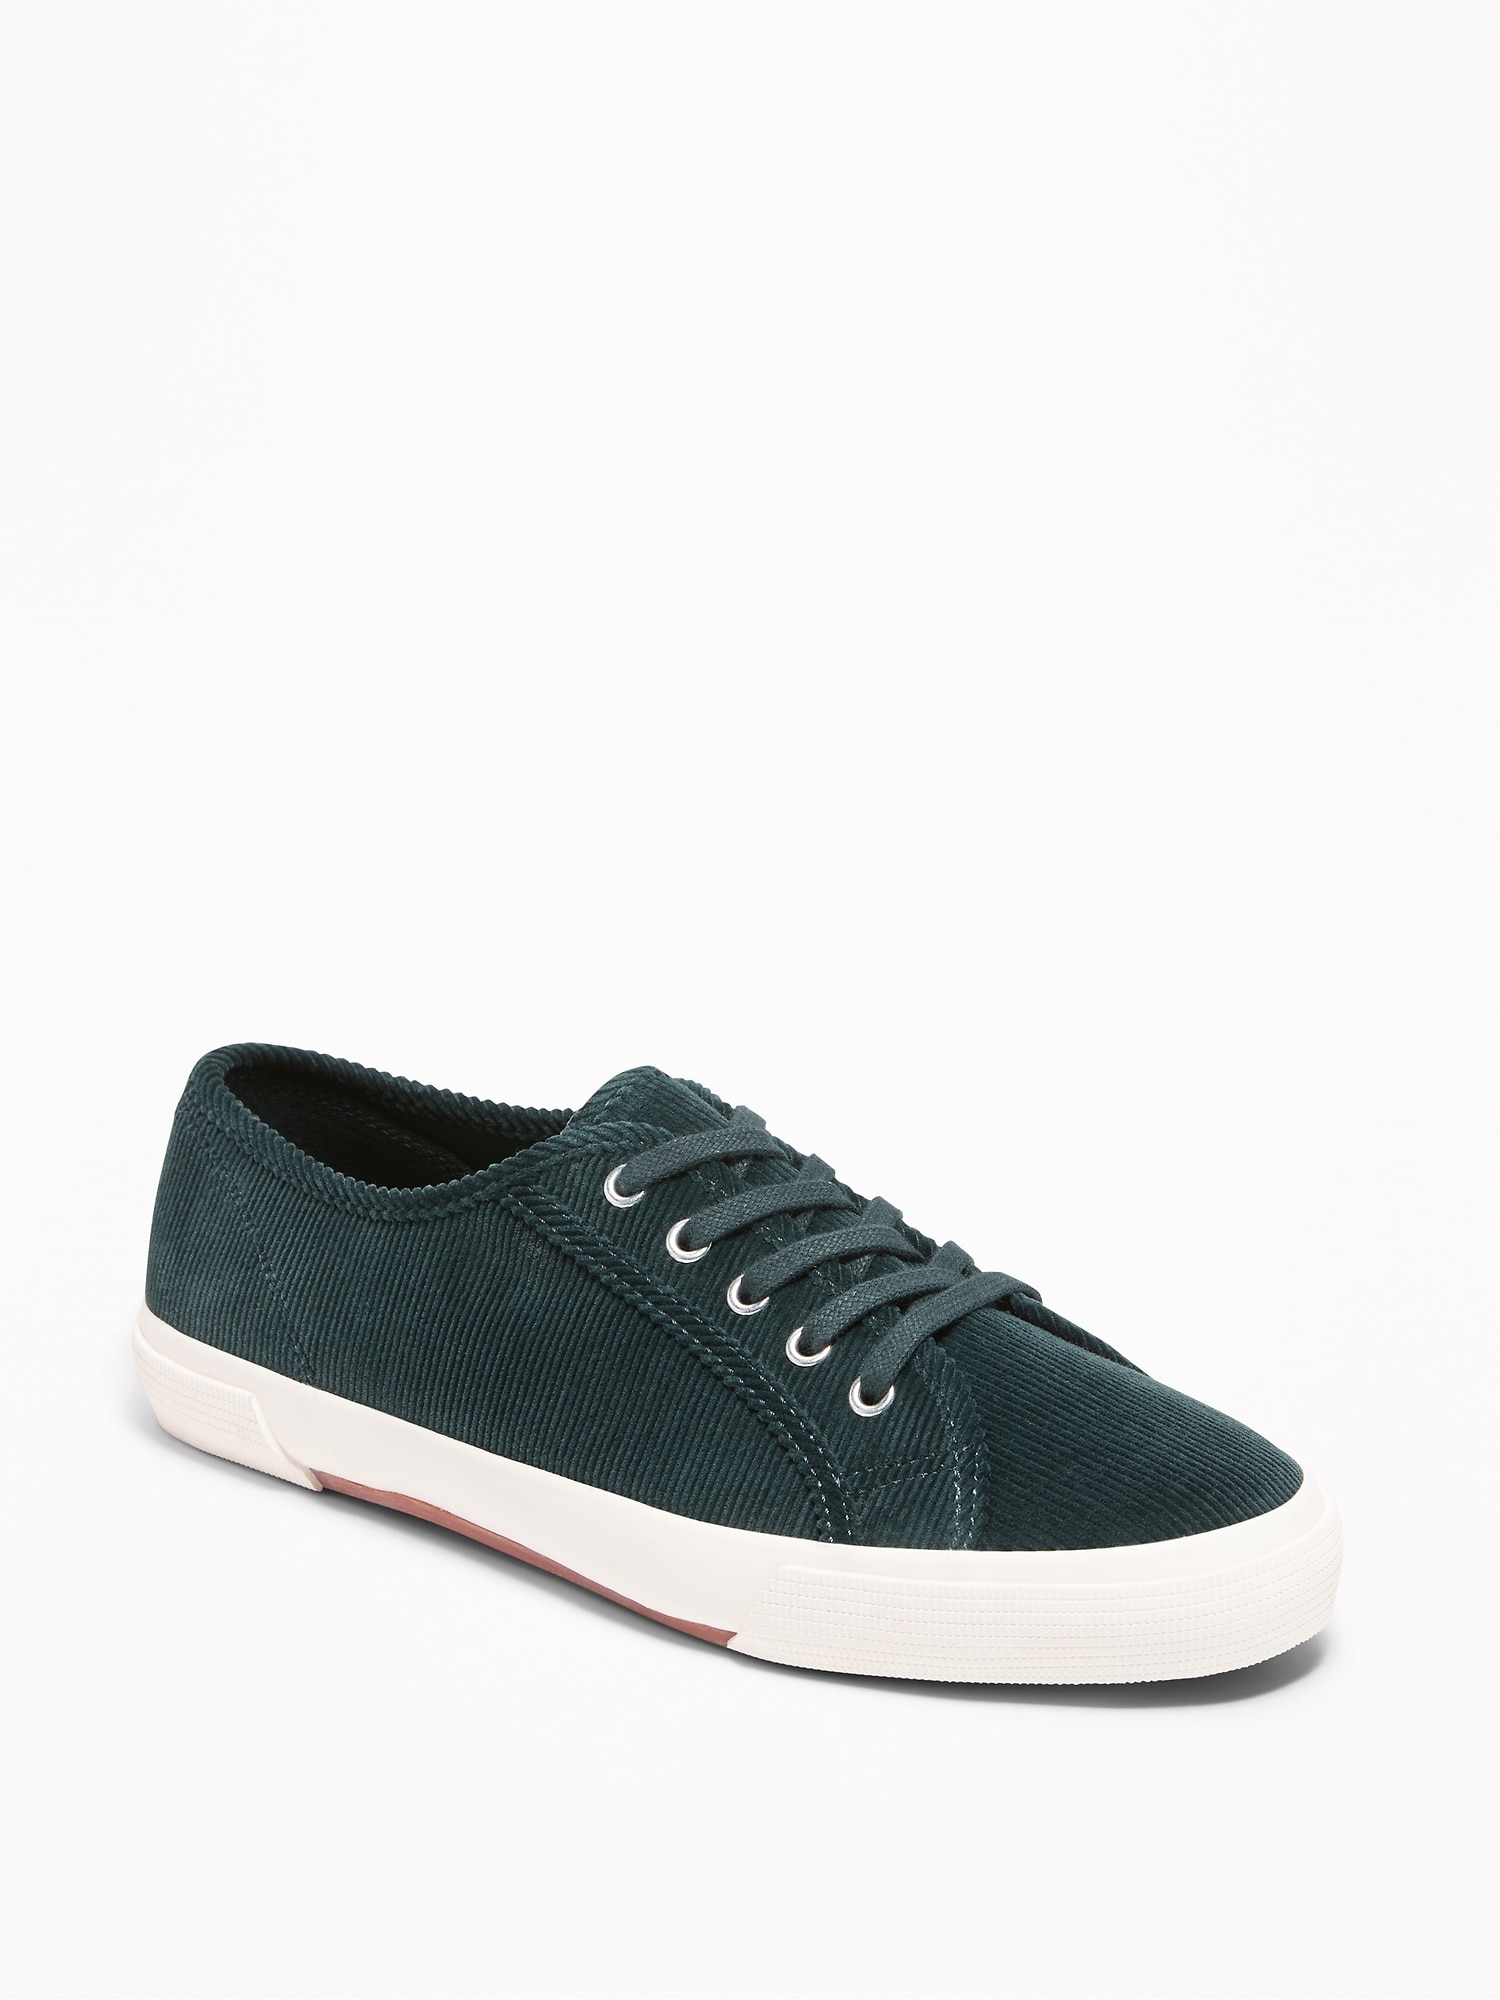 Corduroy Sneakers for Women | Old Navy